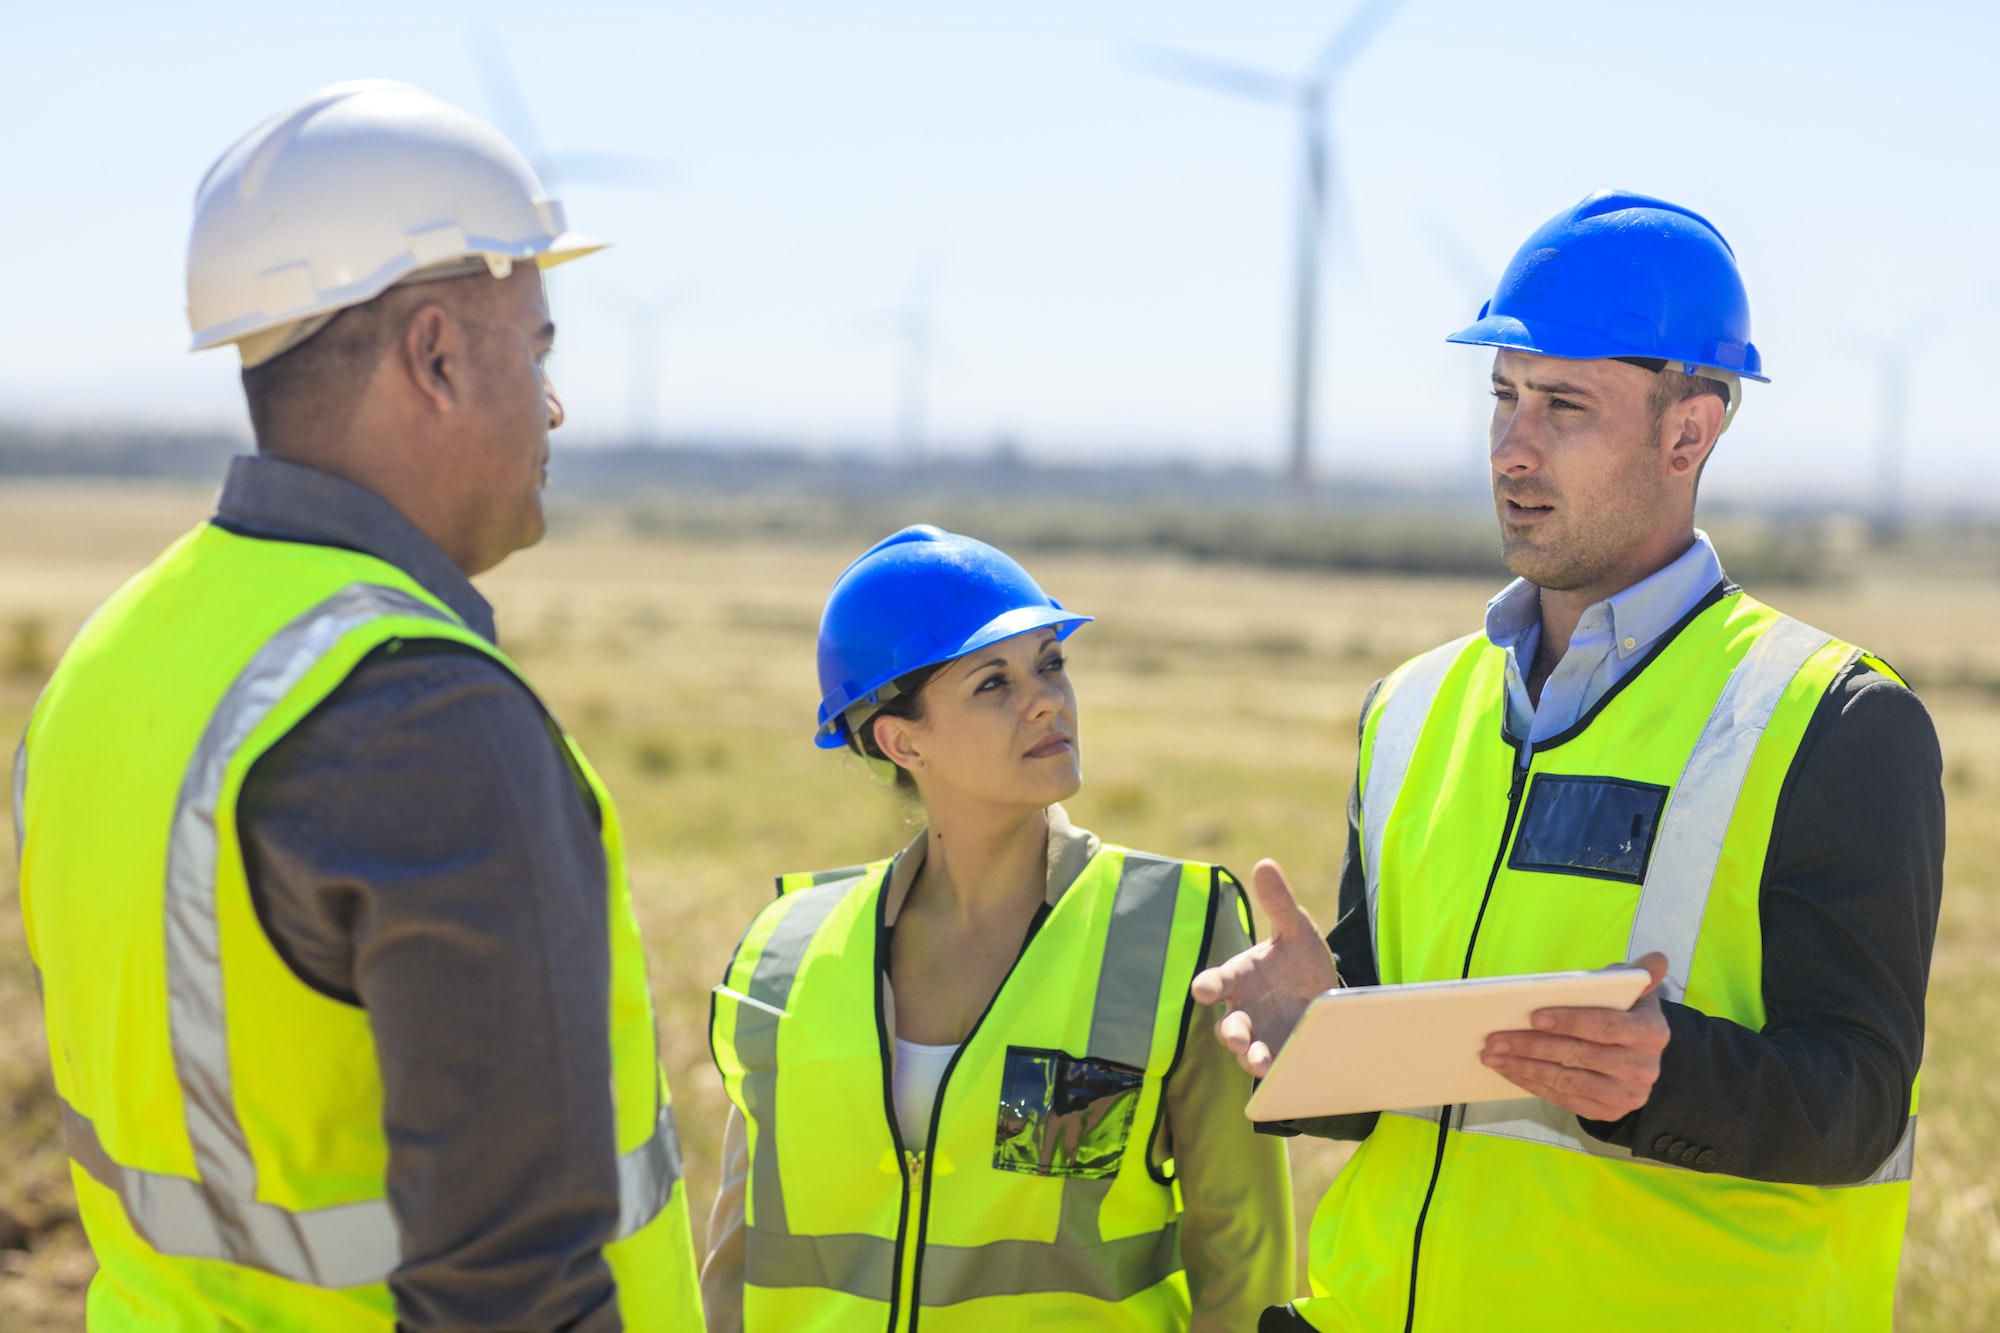 Three engineers with tablet discussing on a wind farm